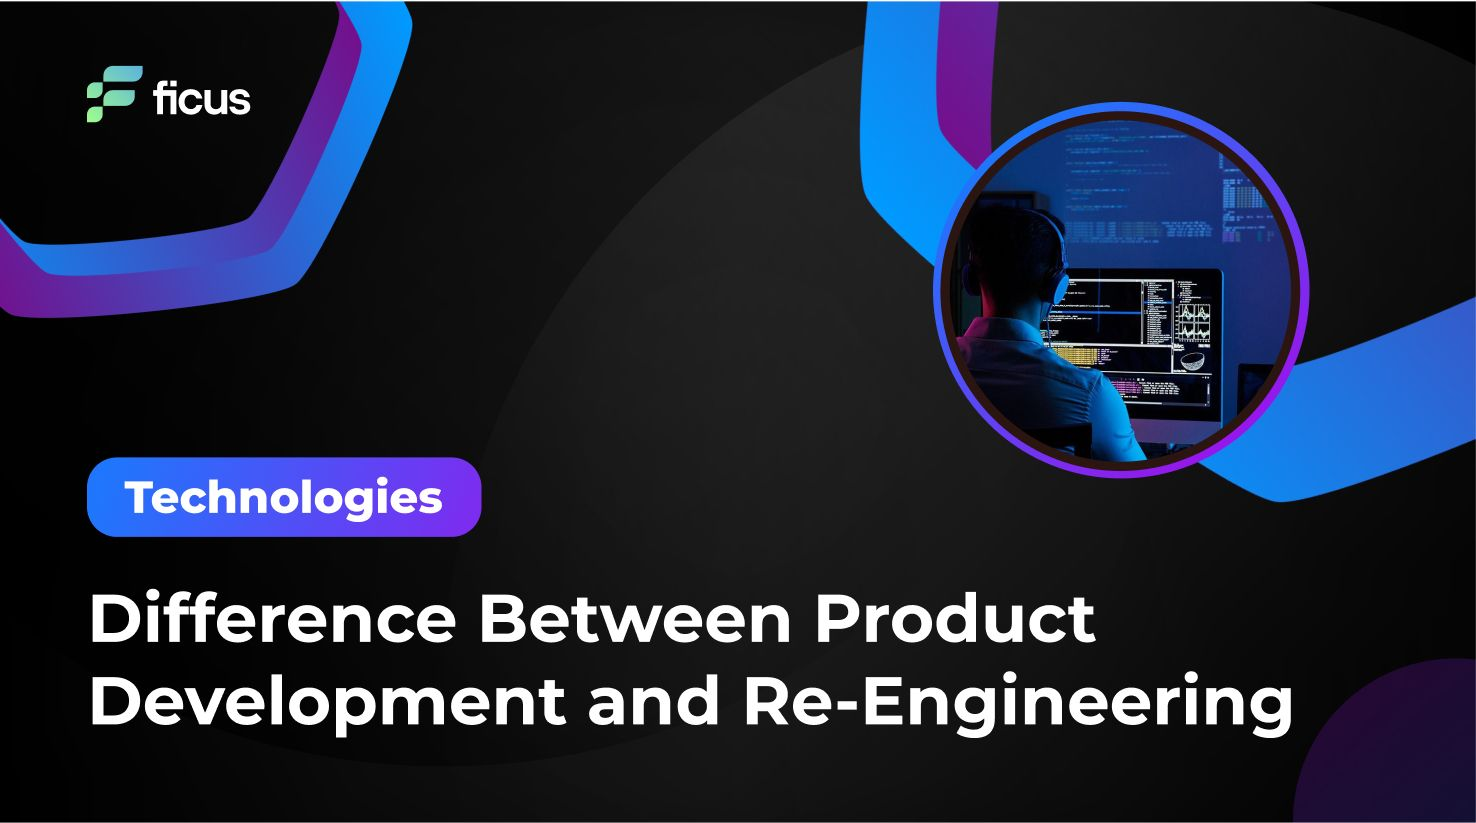 Difference Between Product Development and Re-Engineering